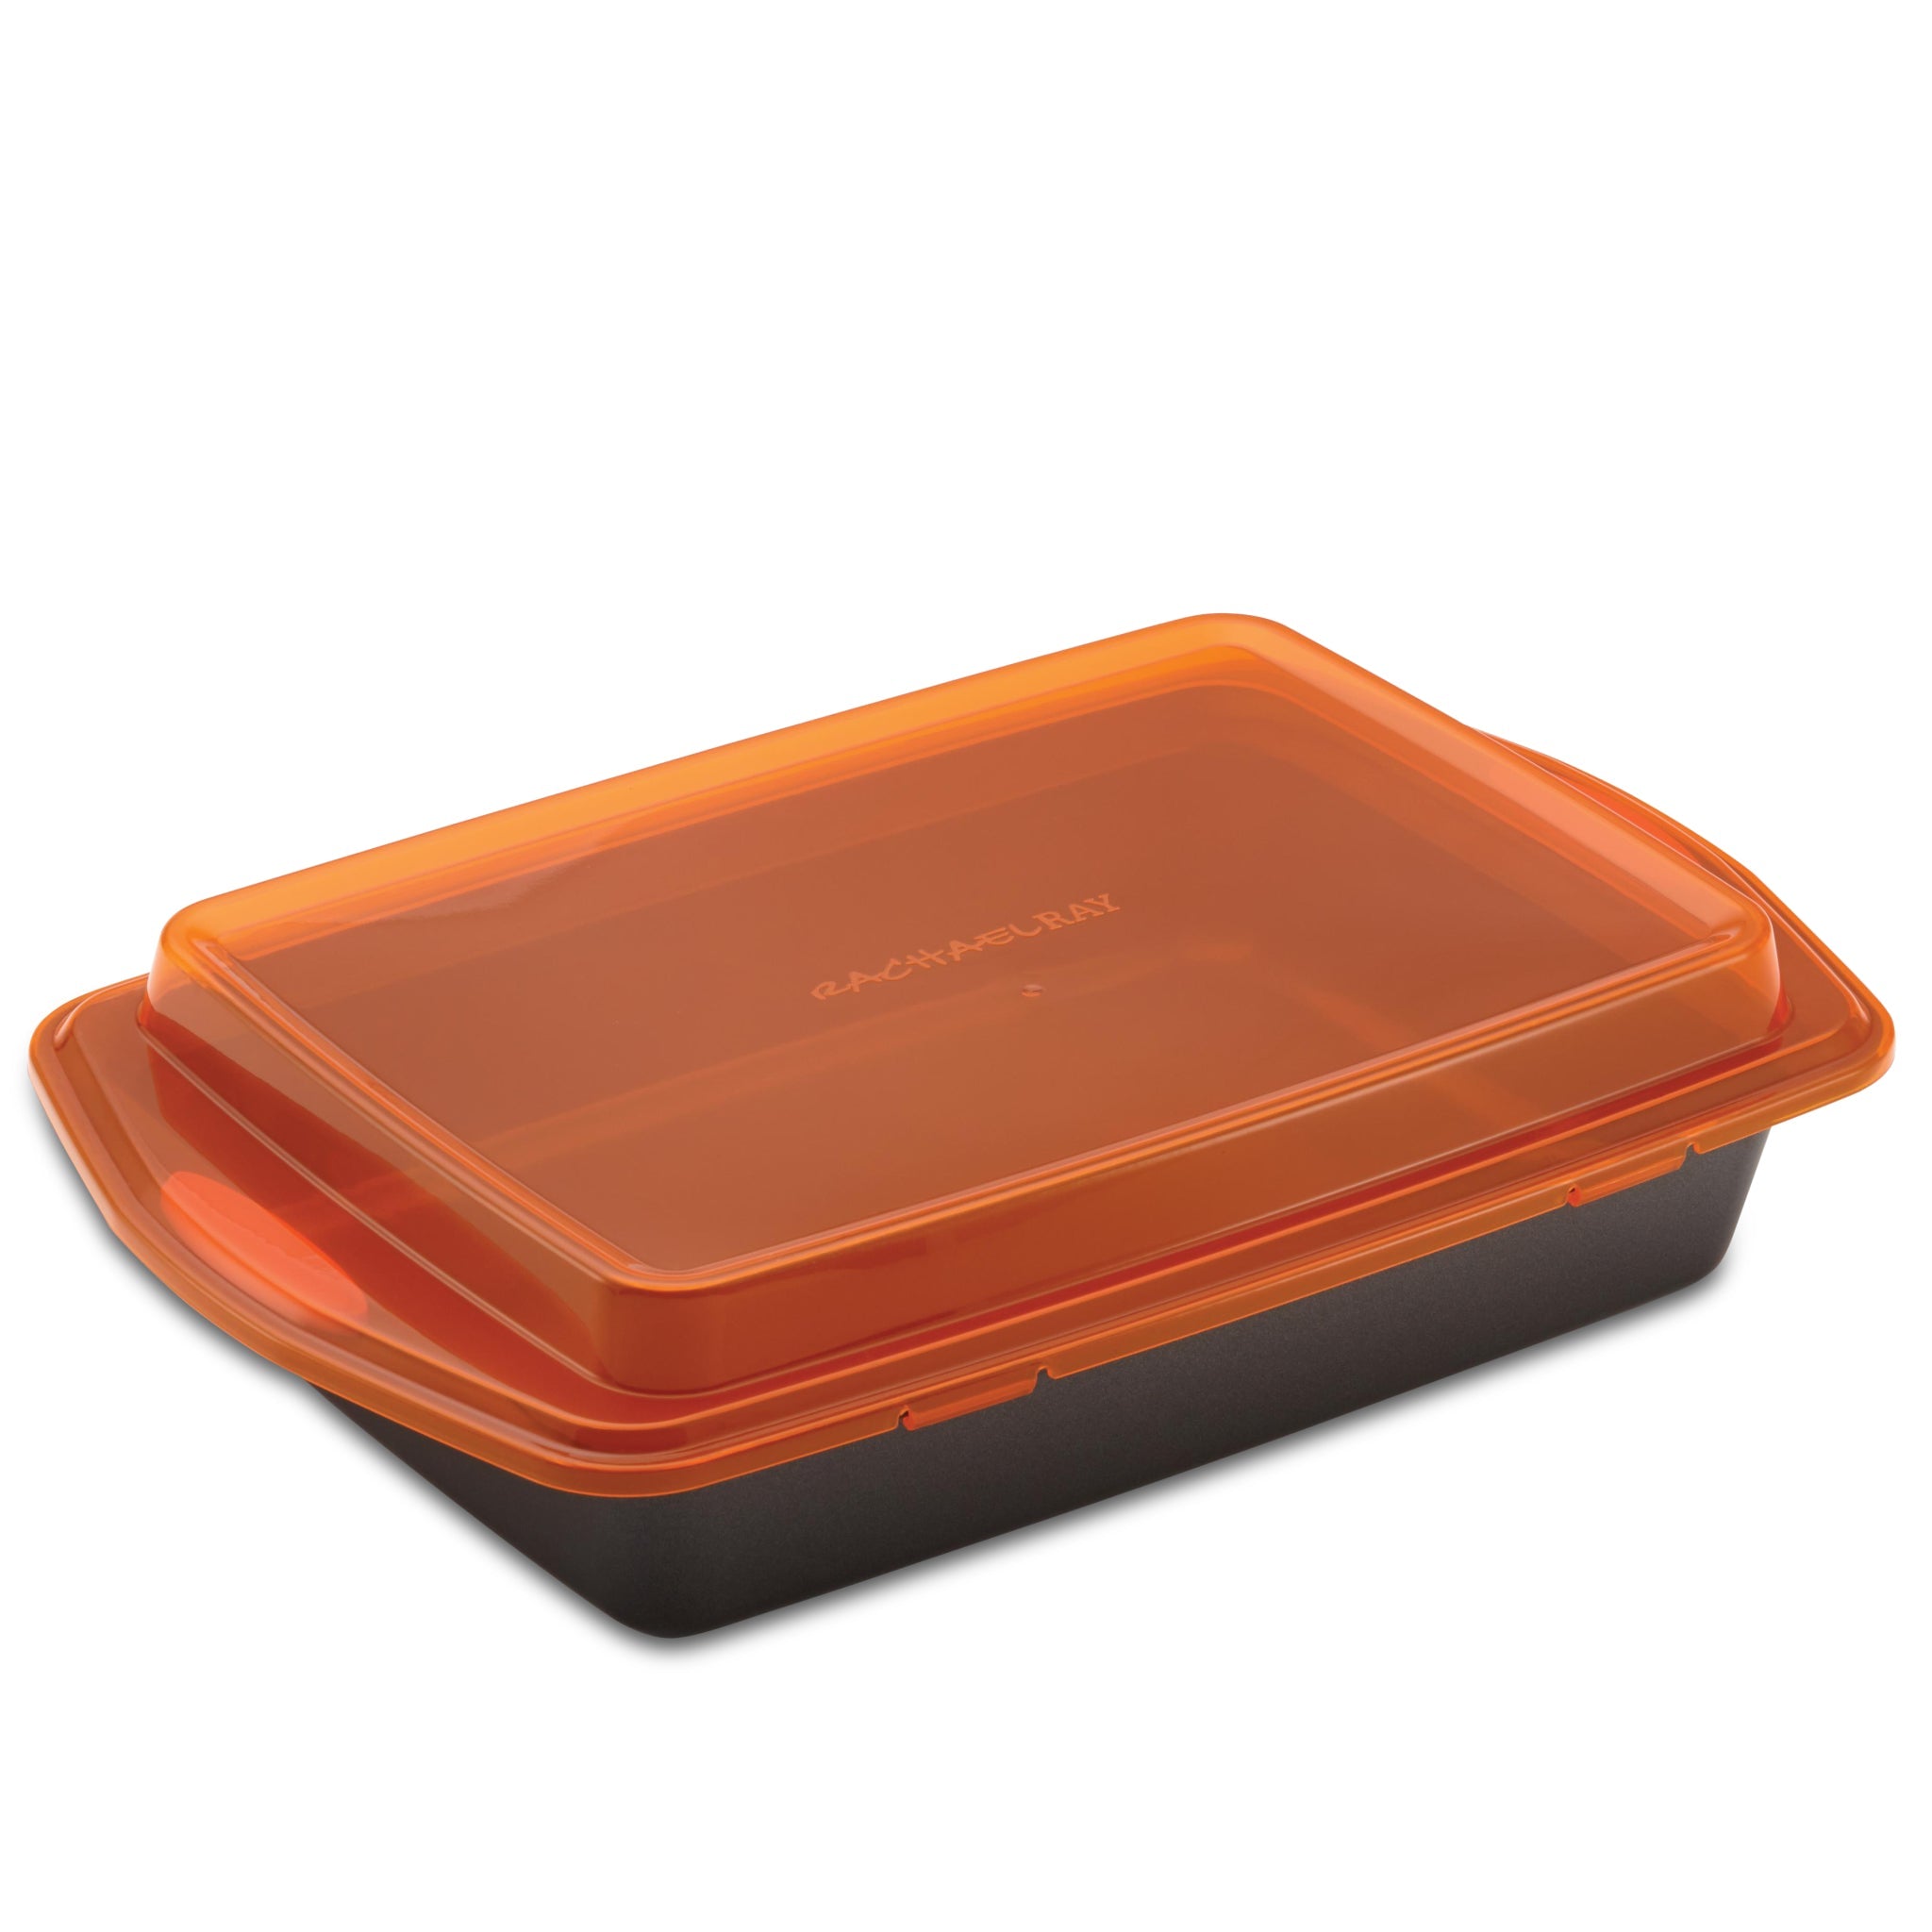 Nonstick Bakeware - Cake Pan with Lid